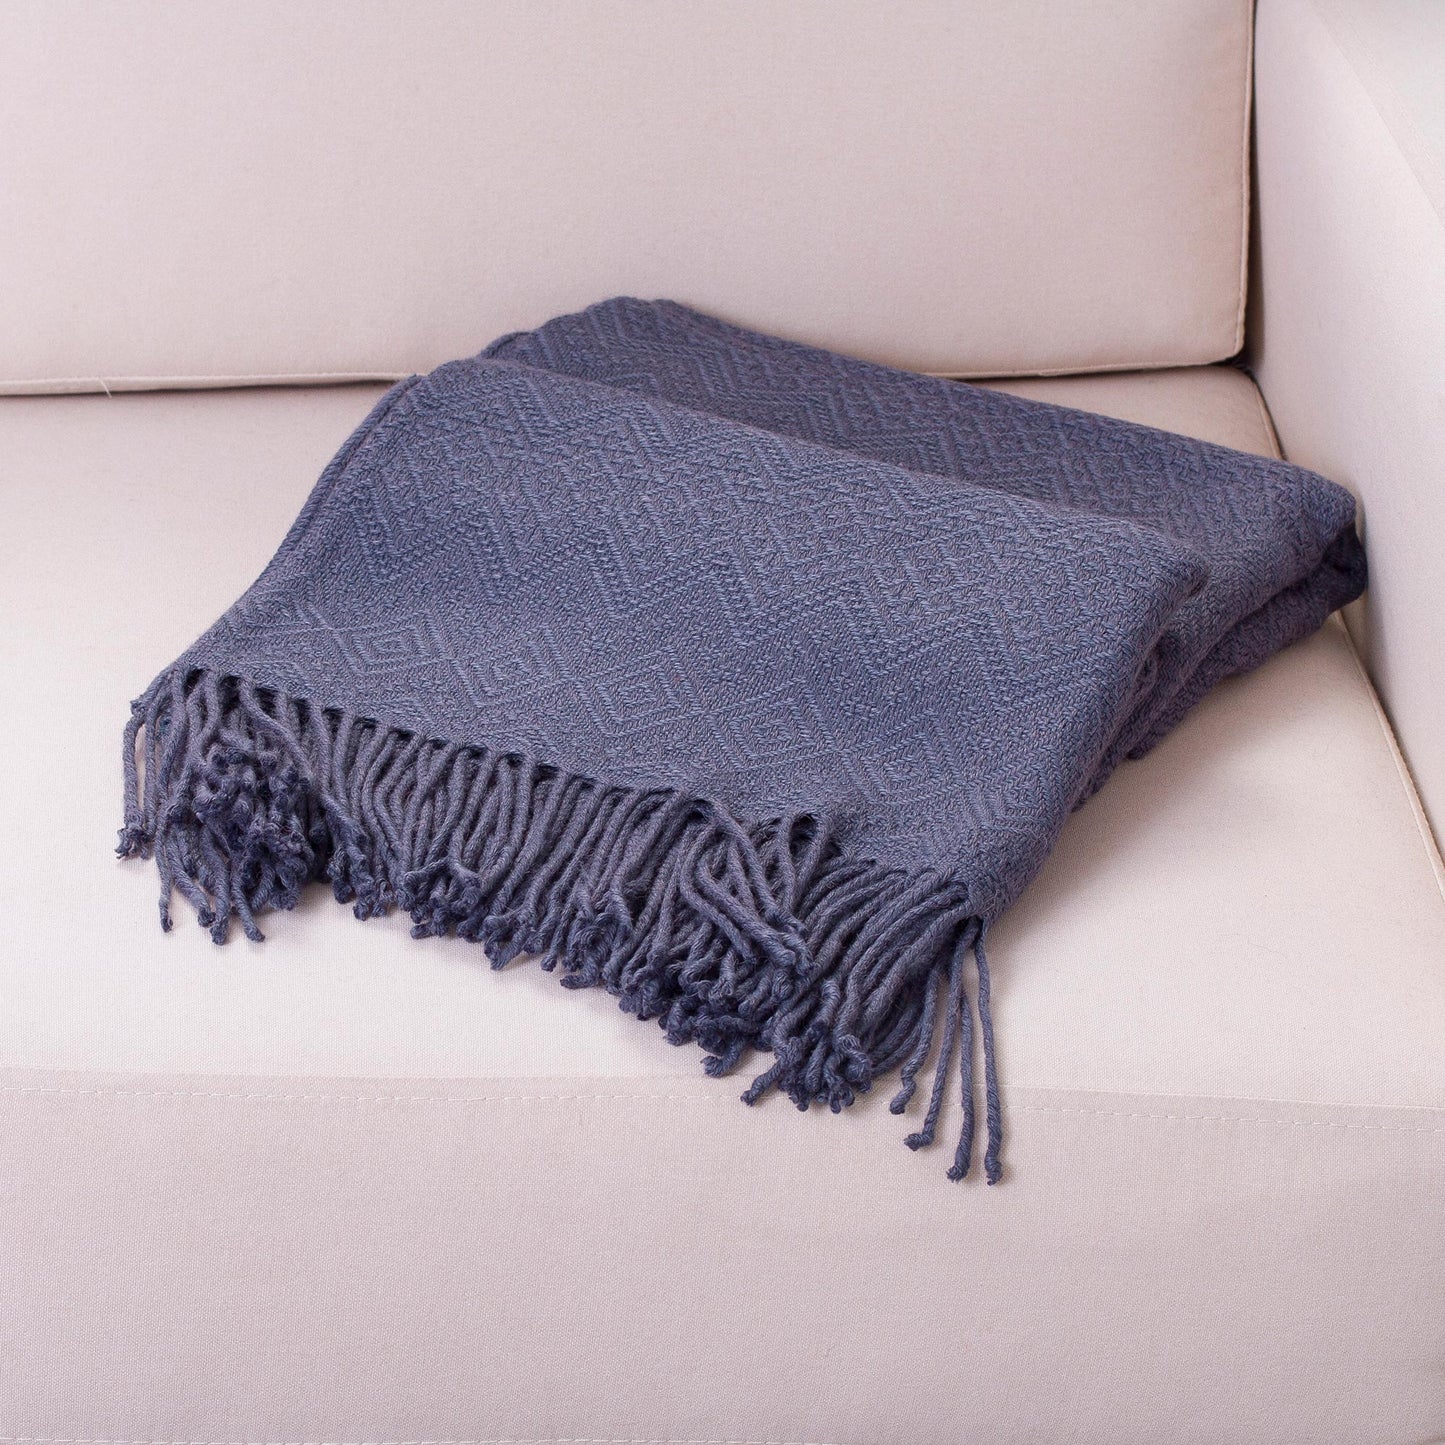 Puno Traditions in Blue Alpaca and AcrylicThrow Blanket with Fringe in Denim Blue